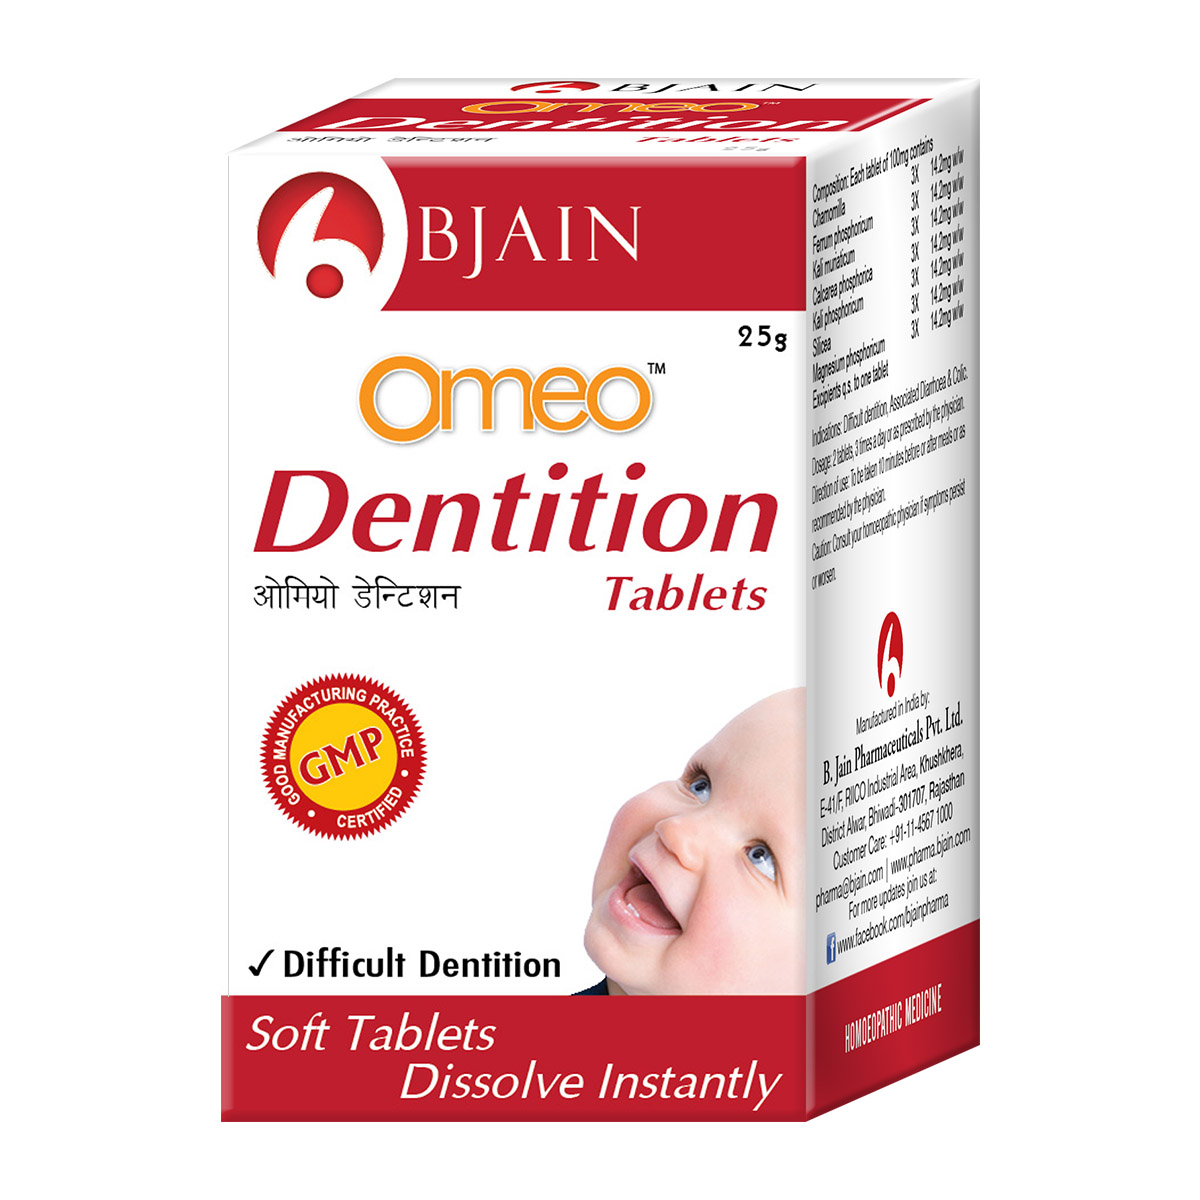 BJain  Homeopathic Omeo Dentition Tablets Online